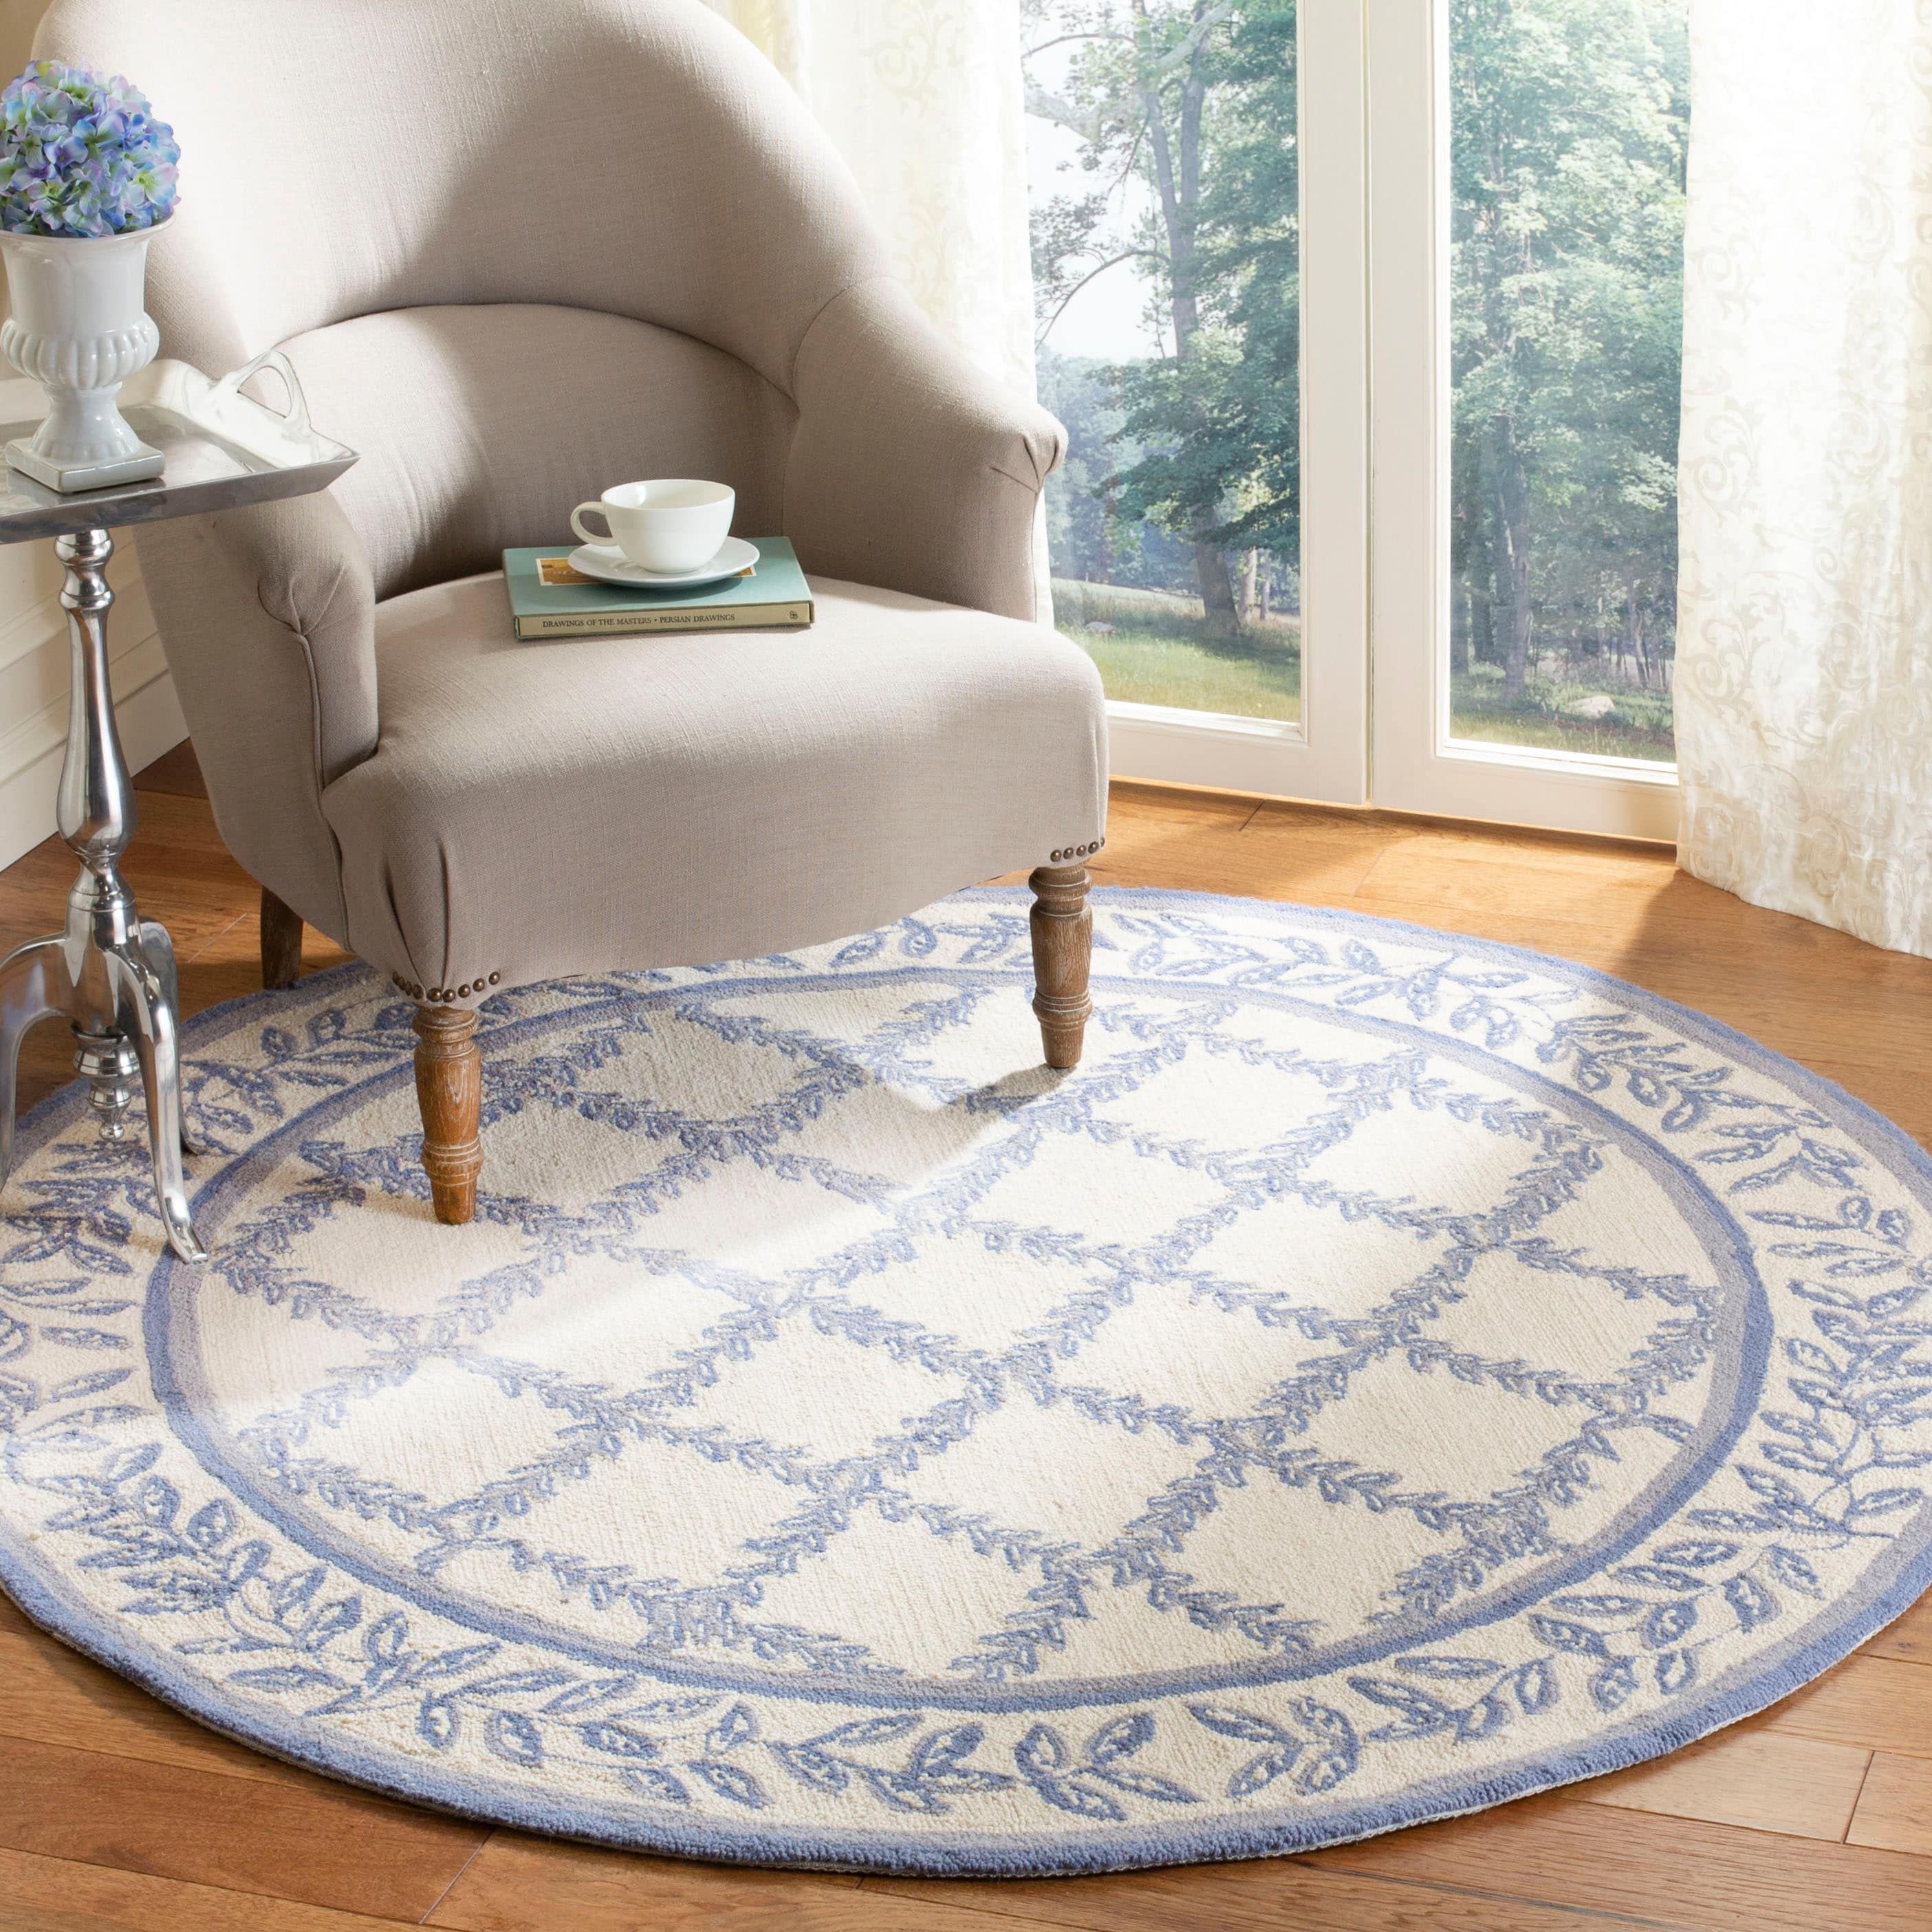 Safavieh Chelsea Lattice 8 X 10 Wool Ivory/light Blue Oval Indoor  Floral/botanical Tropical Area Rug In The Rugs Department At Lowes For Lattice Oval Rugs (View 8 of 15)